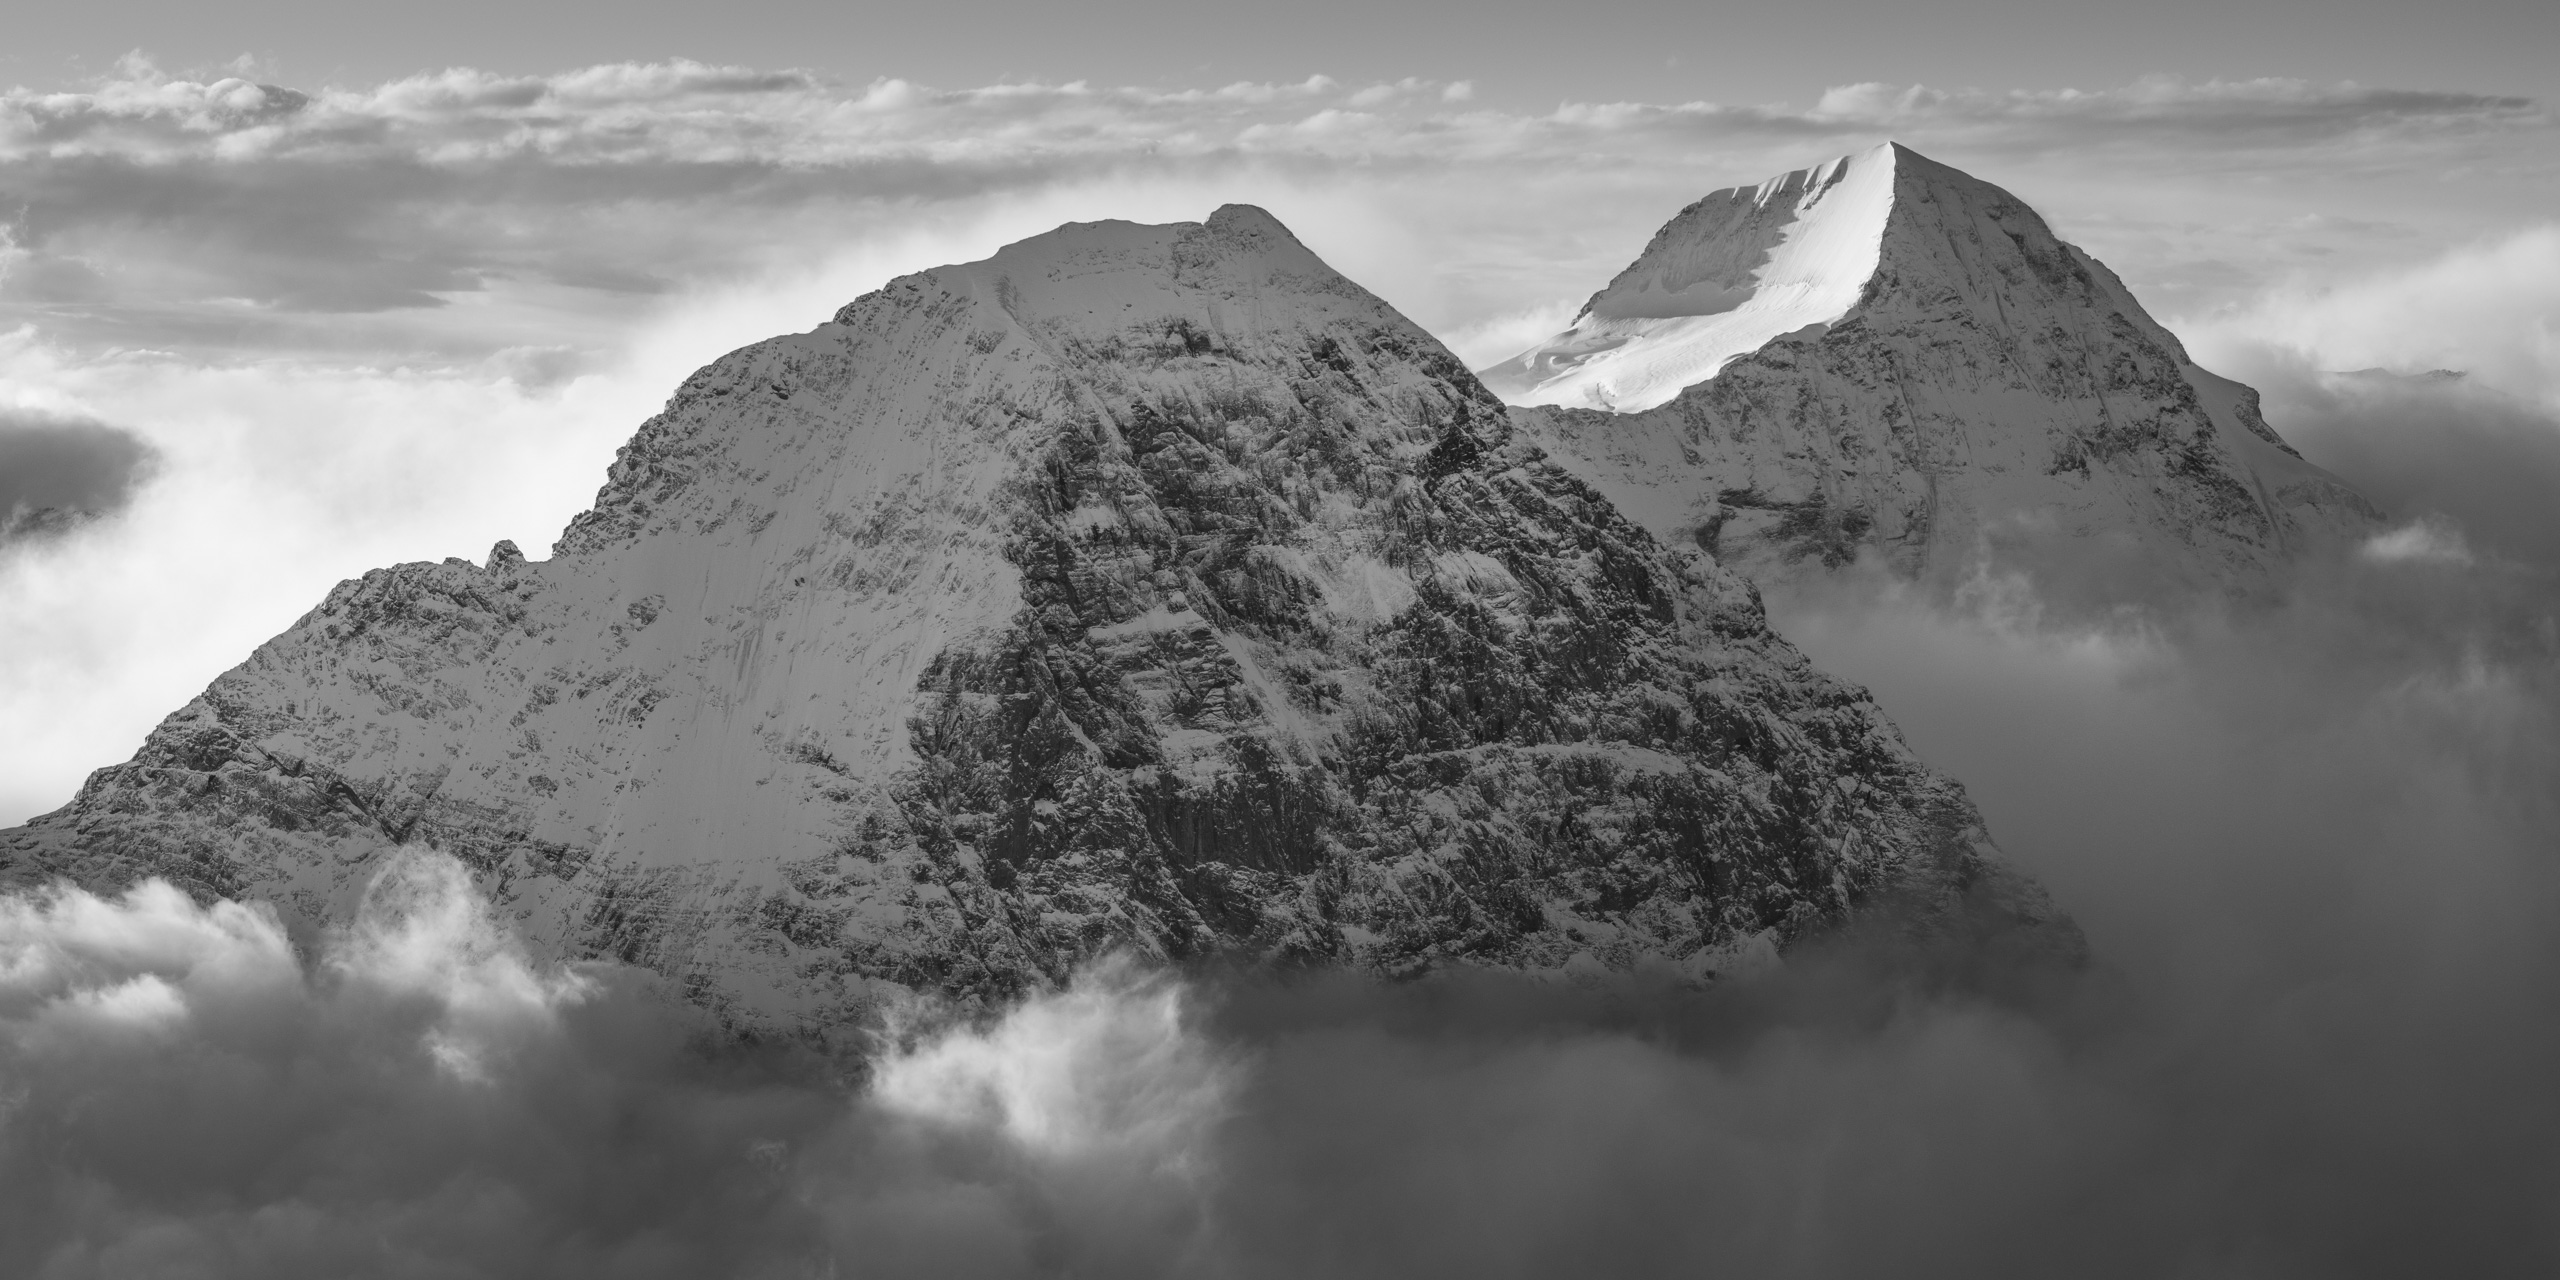 The Eiger north face photos  - The Eiger monch - Black and white mountain with Sea of clouds 